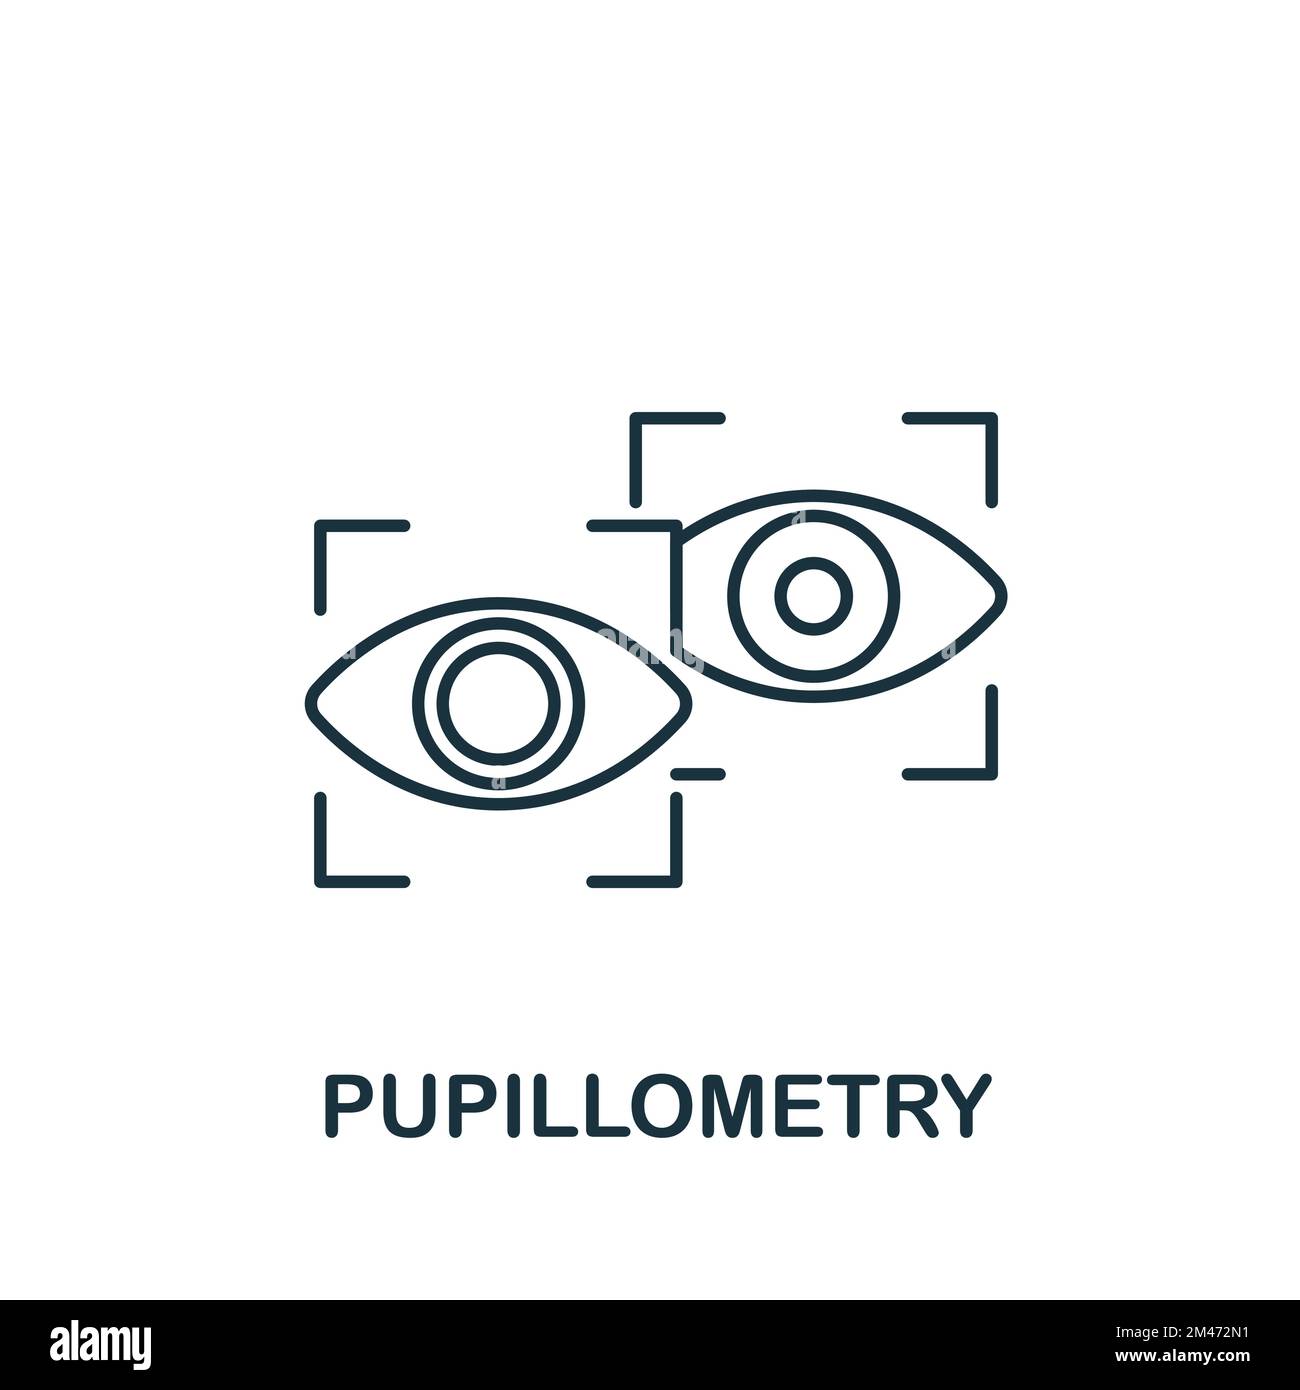 Pupillometry icon. Monochrome simple Neuromarketing icon for templates, web design and infographics Stock Vector